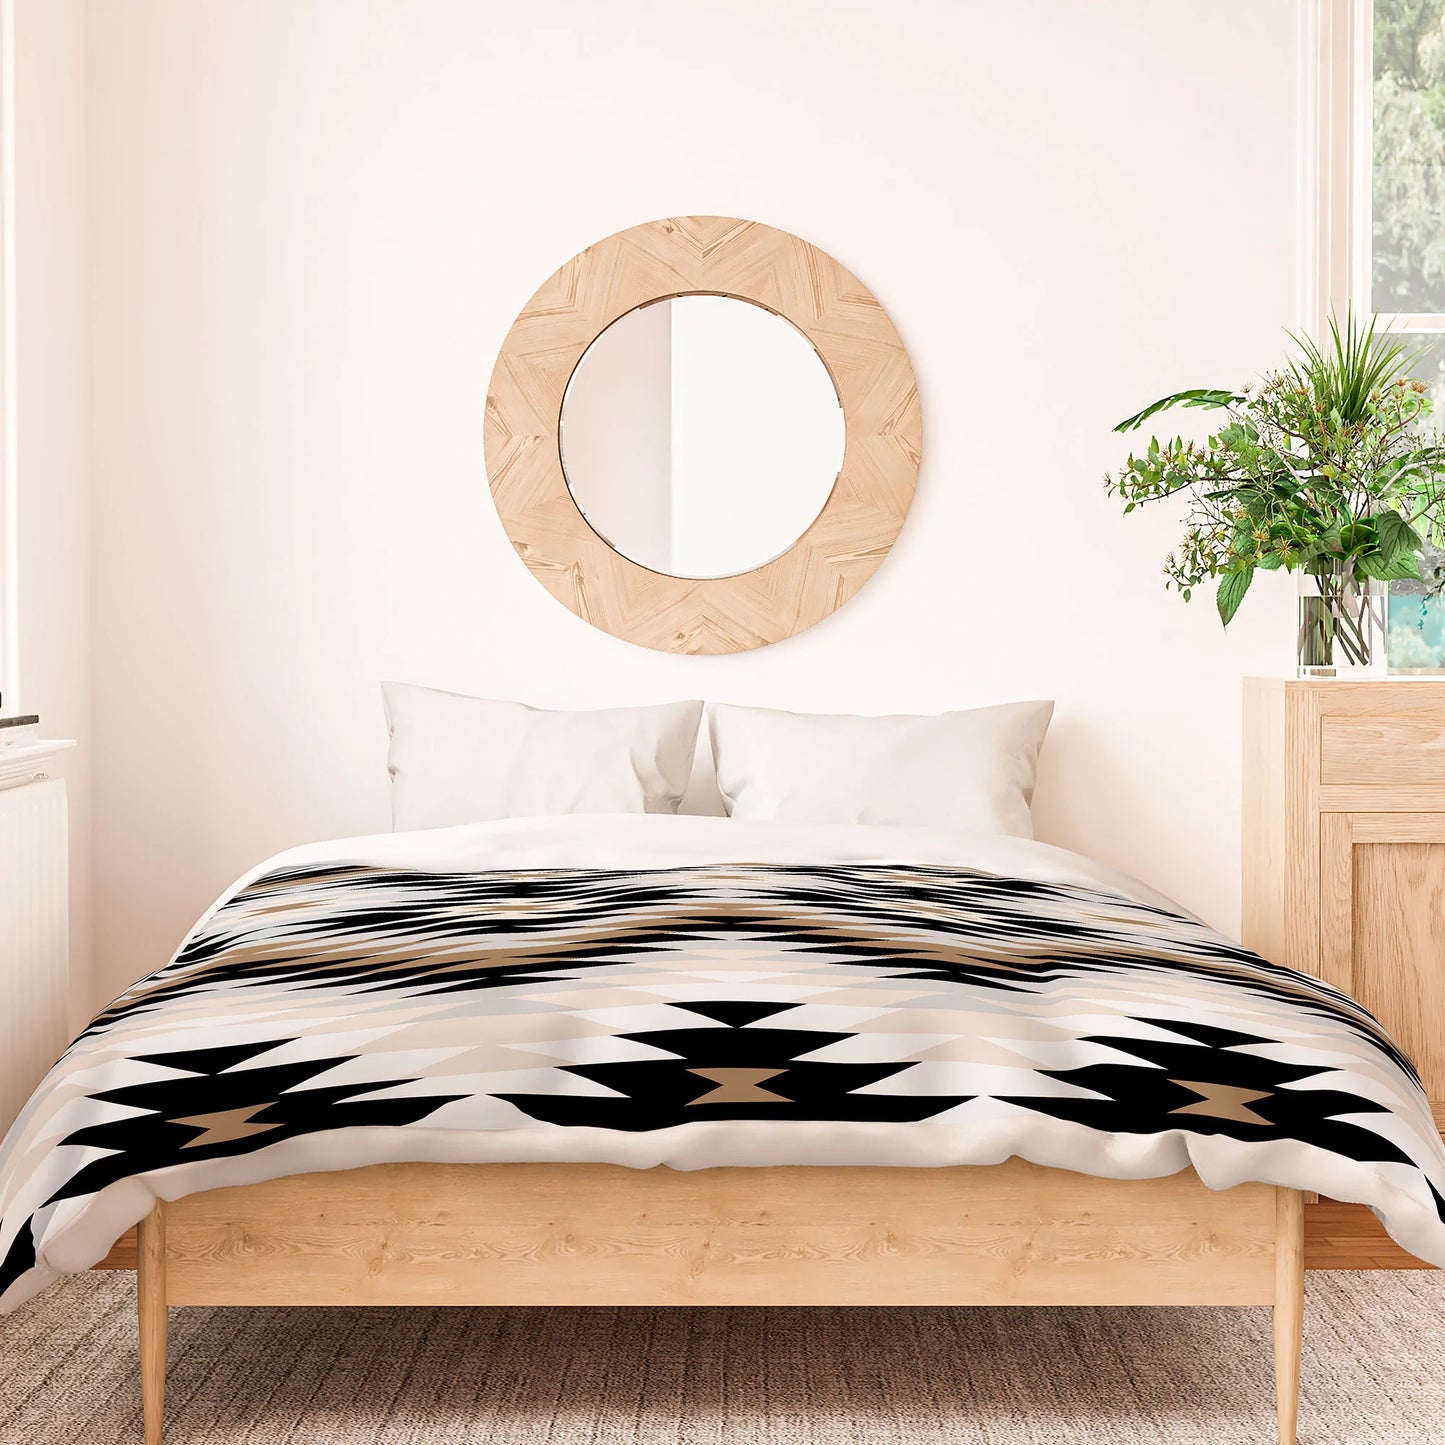 New Mexico Style Aztec Duvet Cover